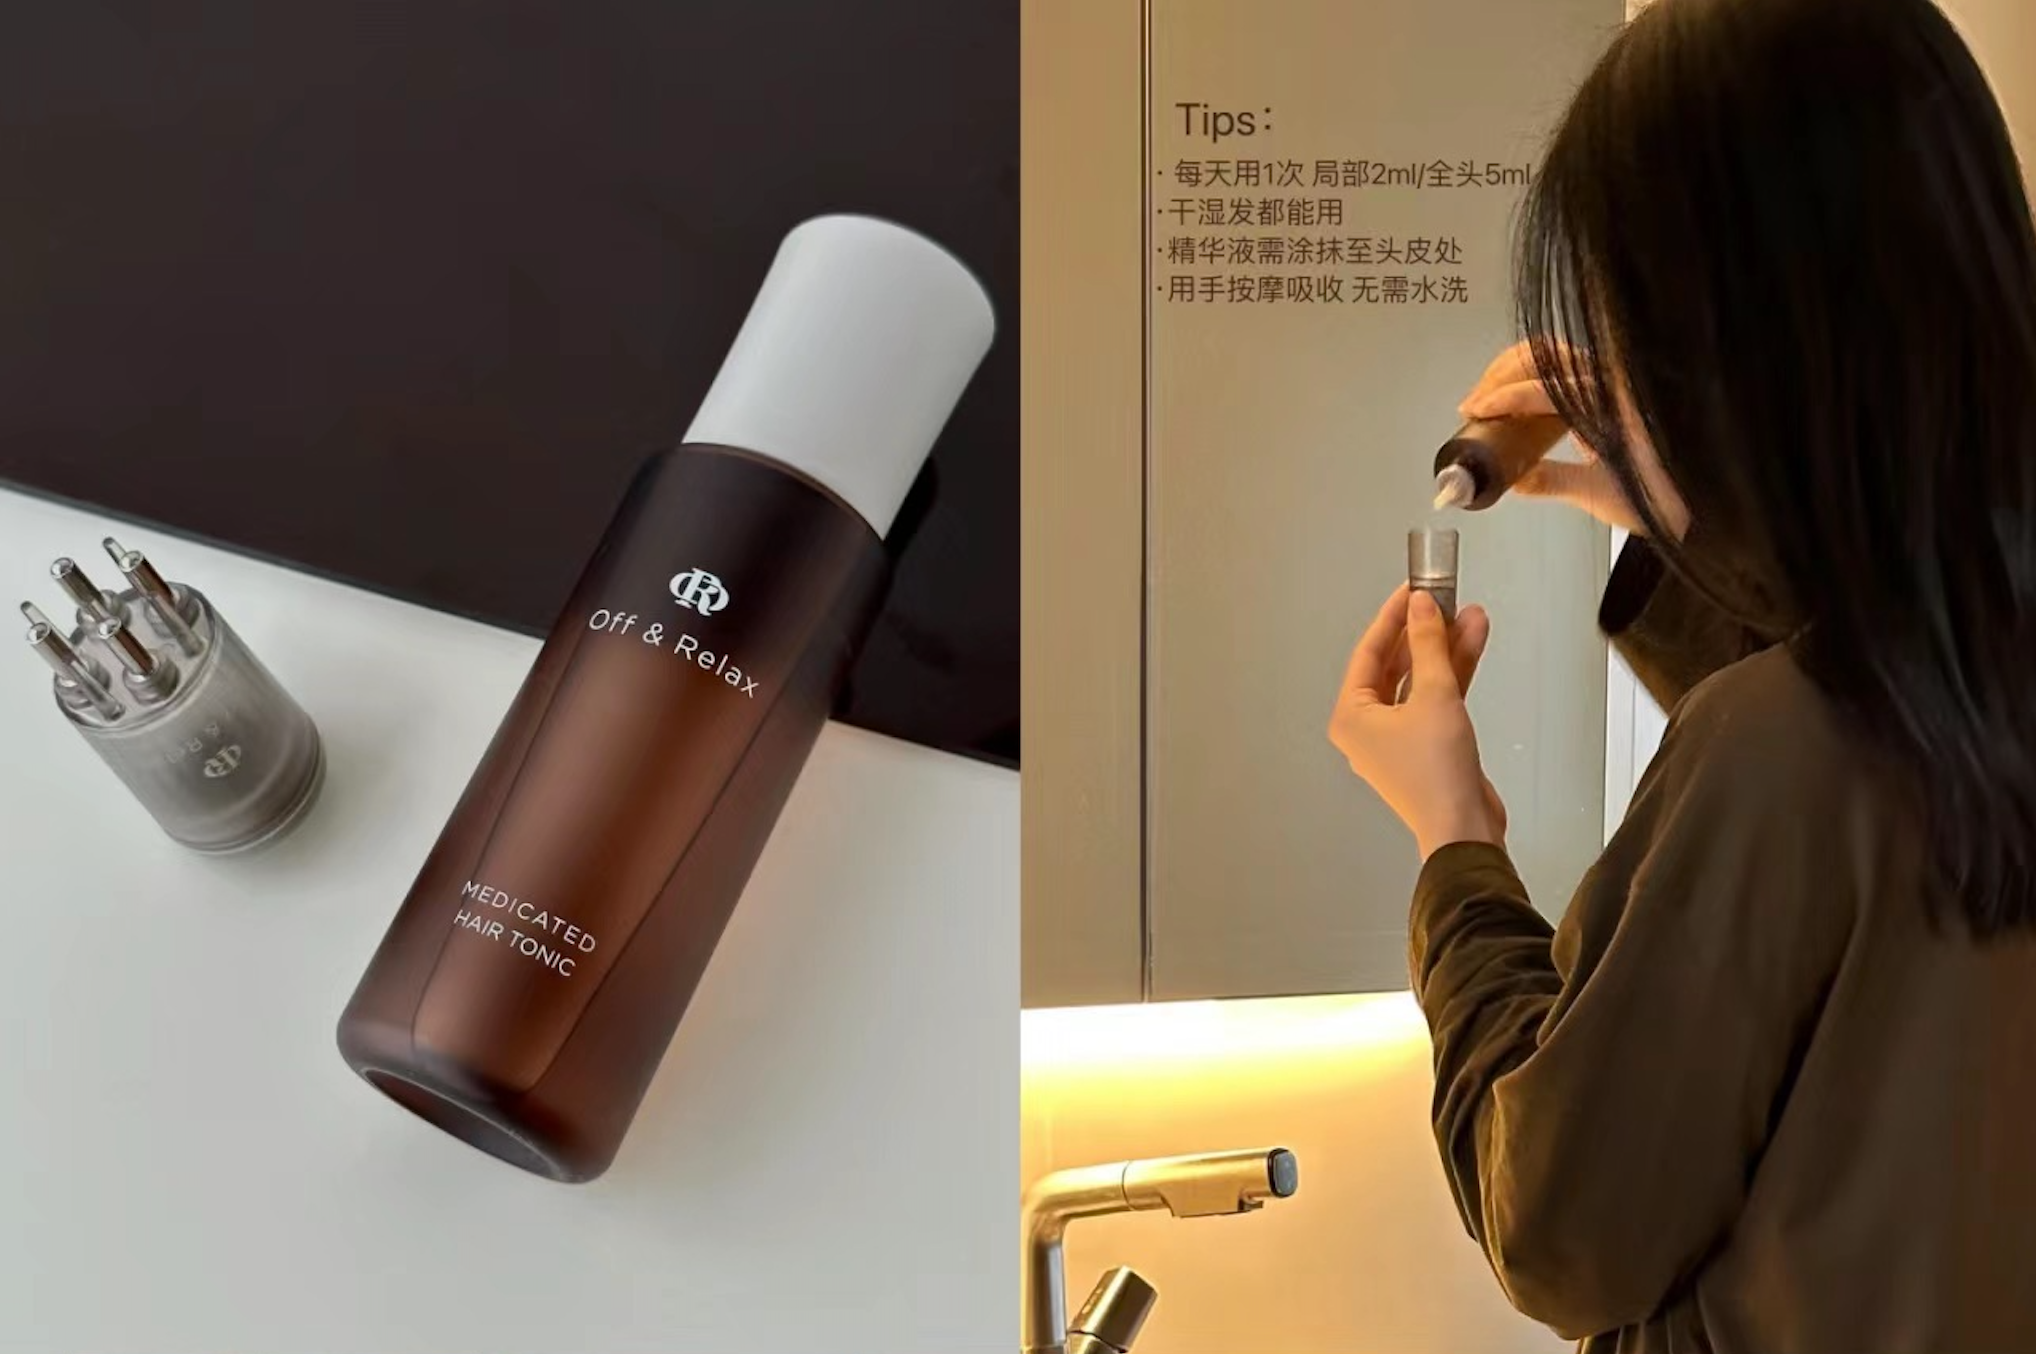 How hair care is China’s burgeoning new wellness trend